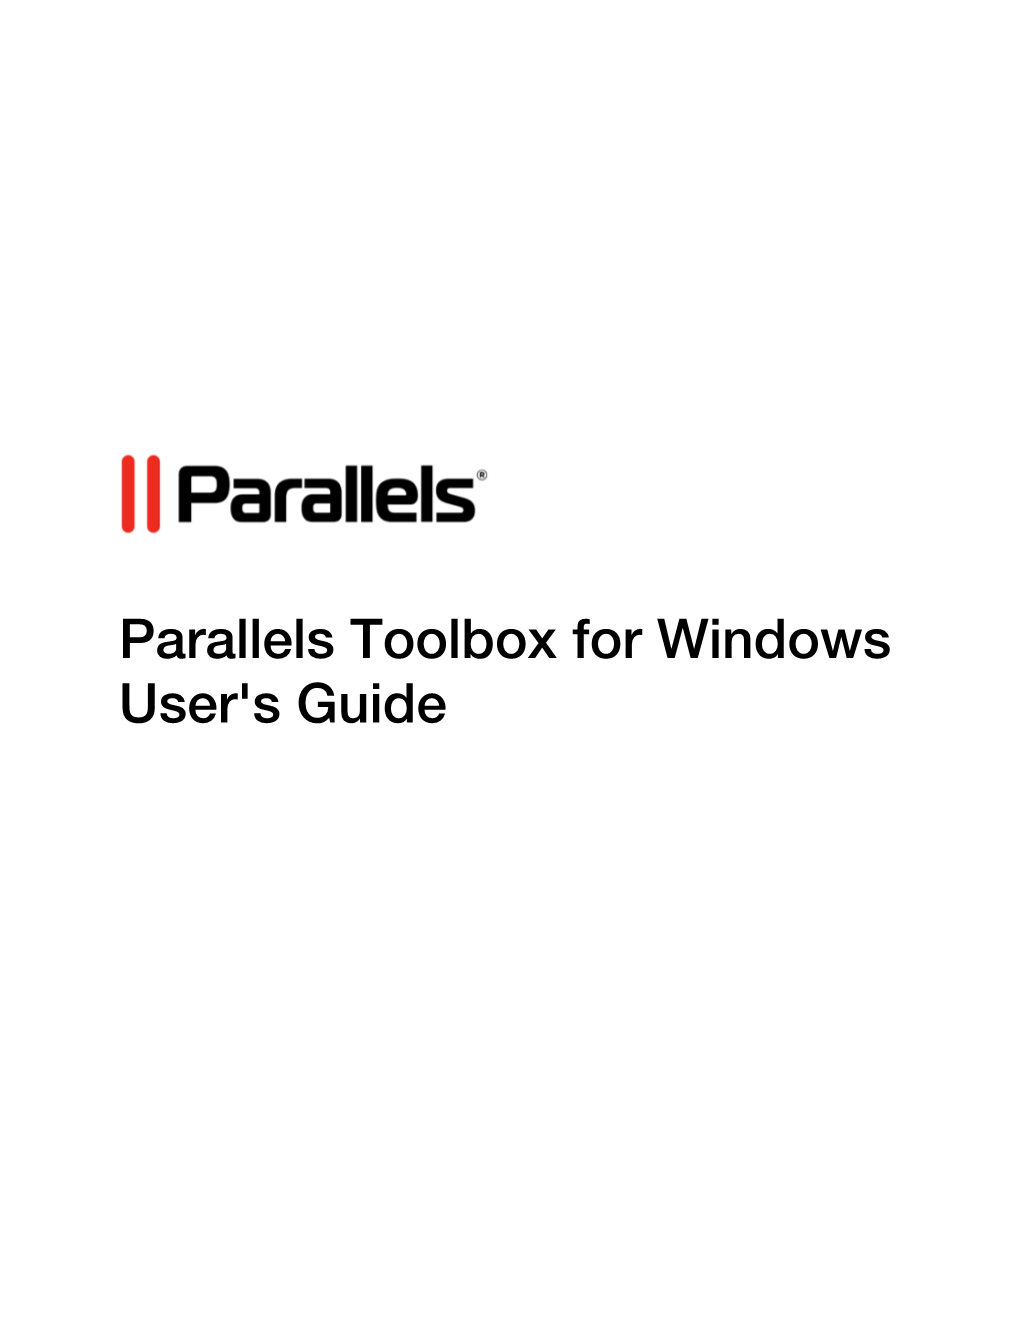 Parallels Toolbox for Windows User's Guide